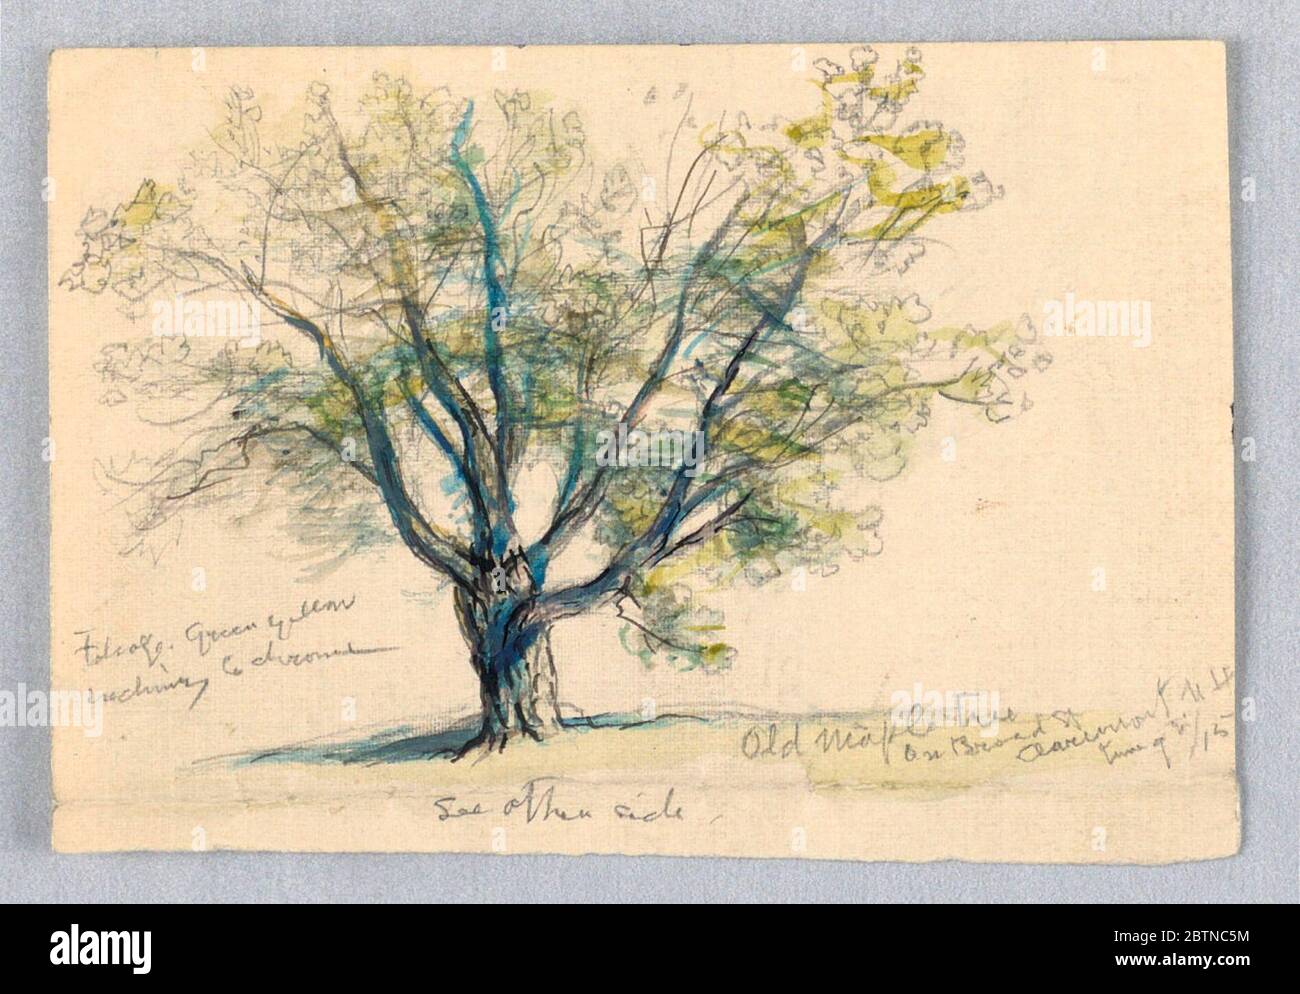 sketch maple tree research in progresson recto and verso a tree captions old maple tree on broad st clarement n h and the date respectively in ink over graphite see other side is written in graphite on either side 2BTNC5M